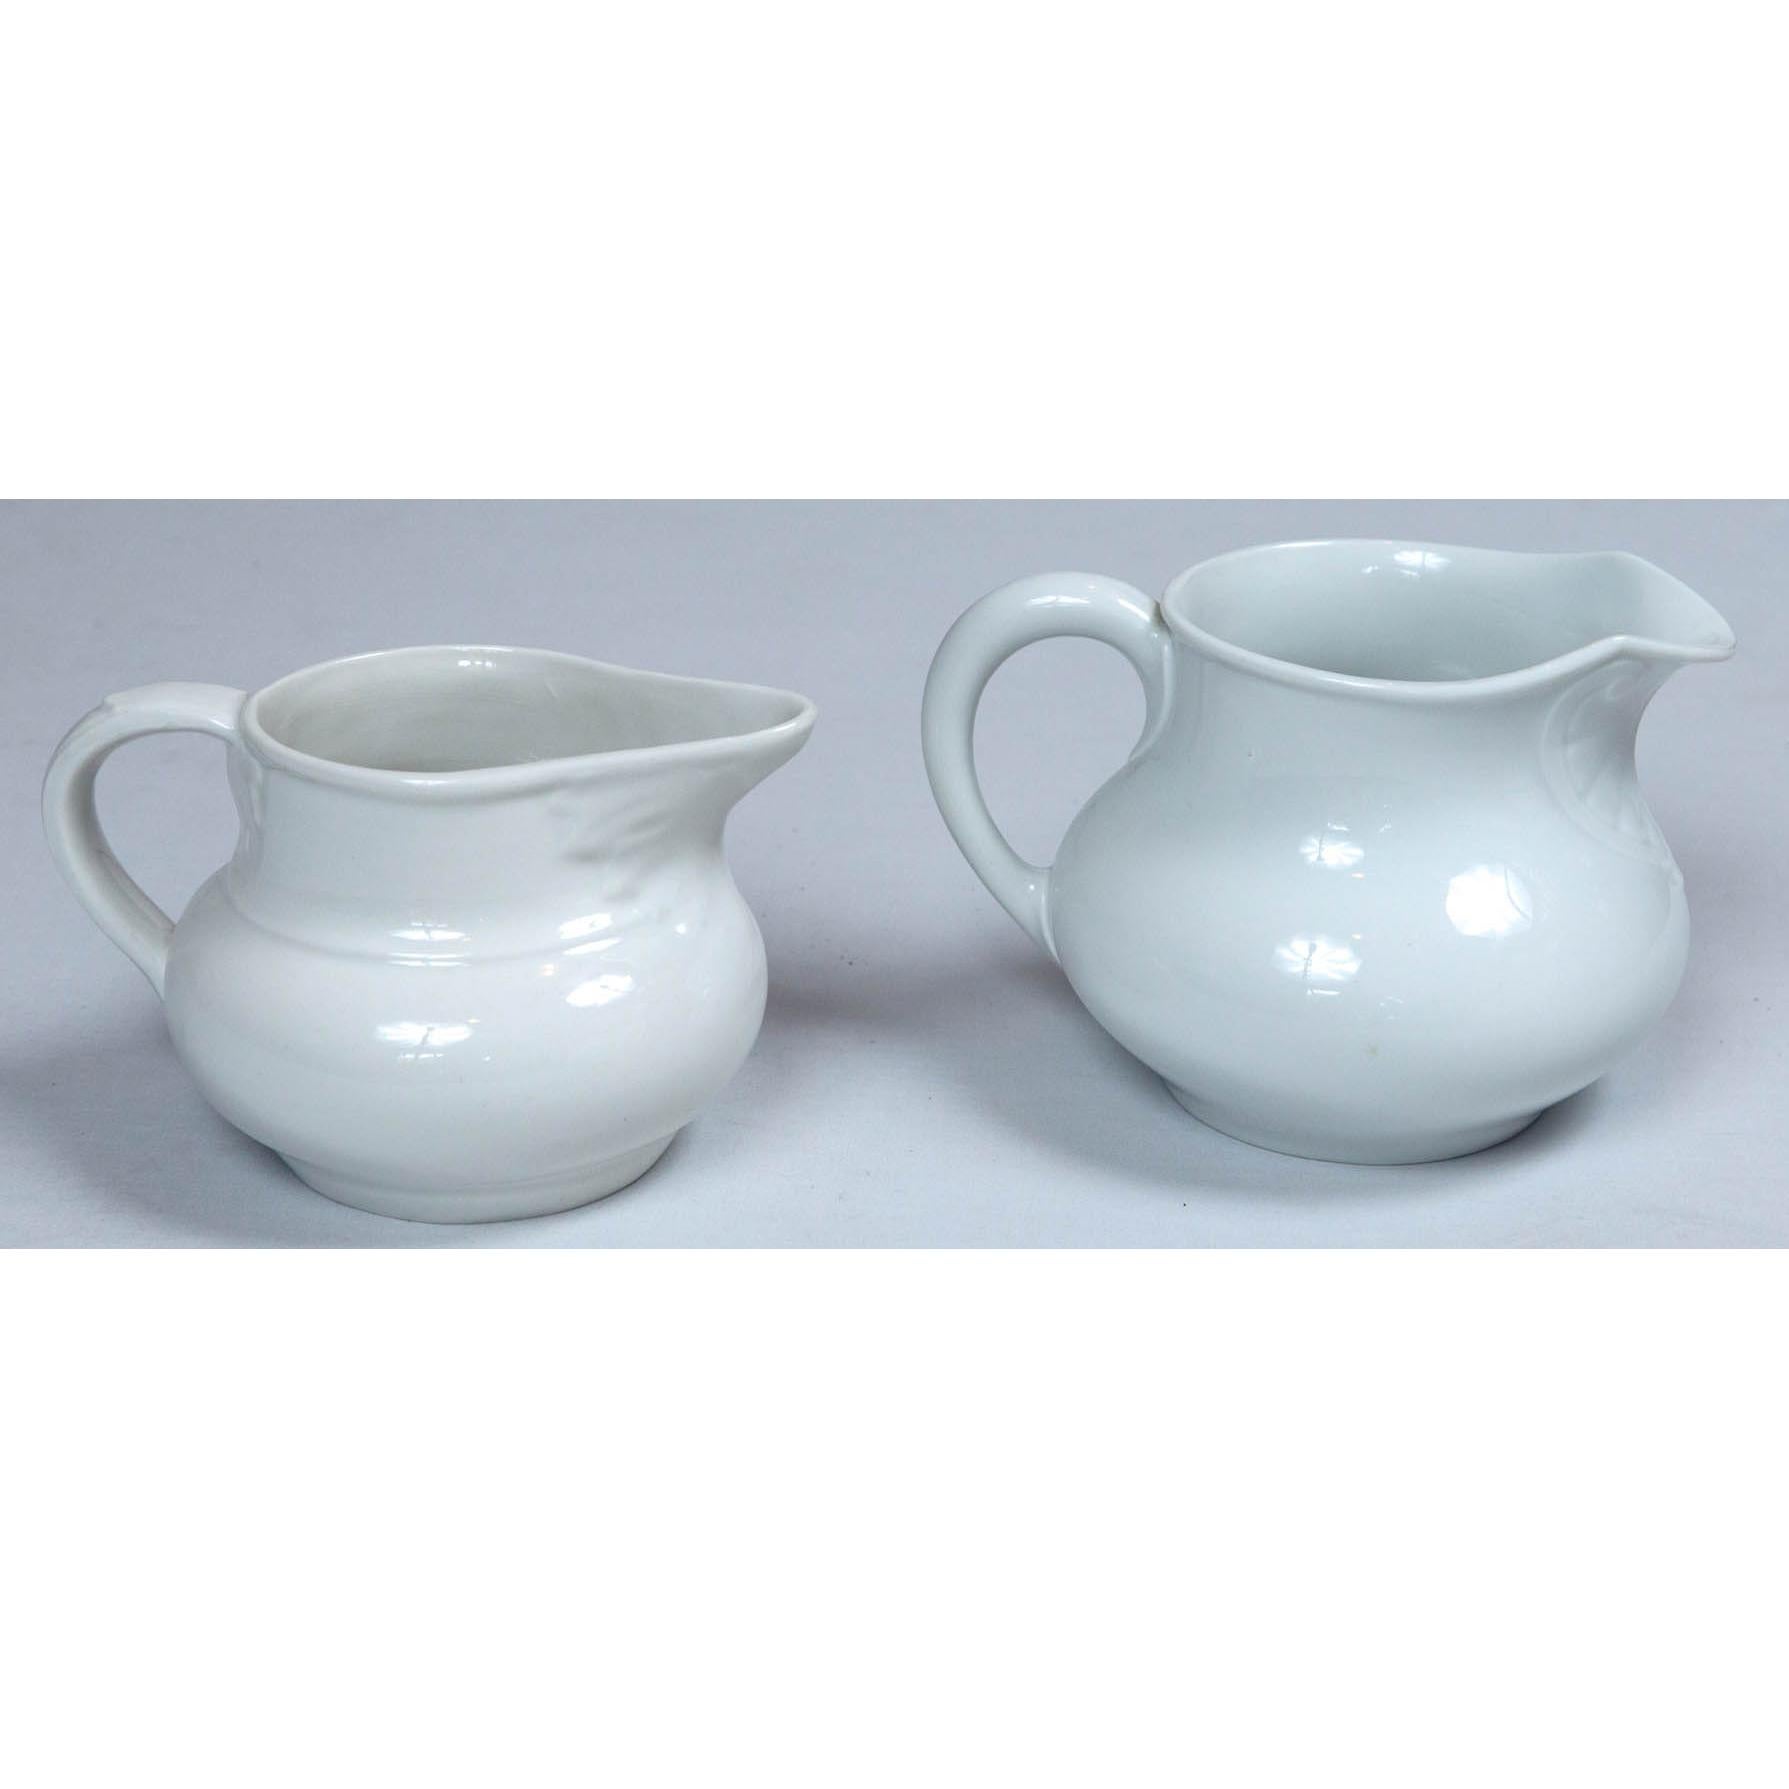 Ironstone dairy pitchers, France, circa 1900. Elegant Art Nouveau style. Priced individually. Smaller size pitcher available.